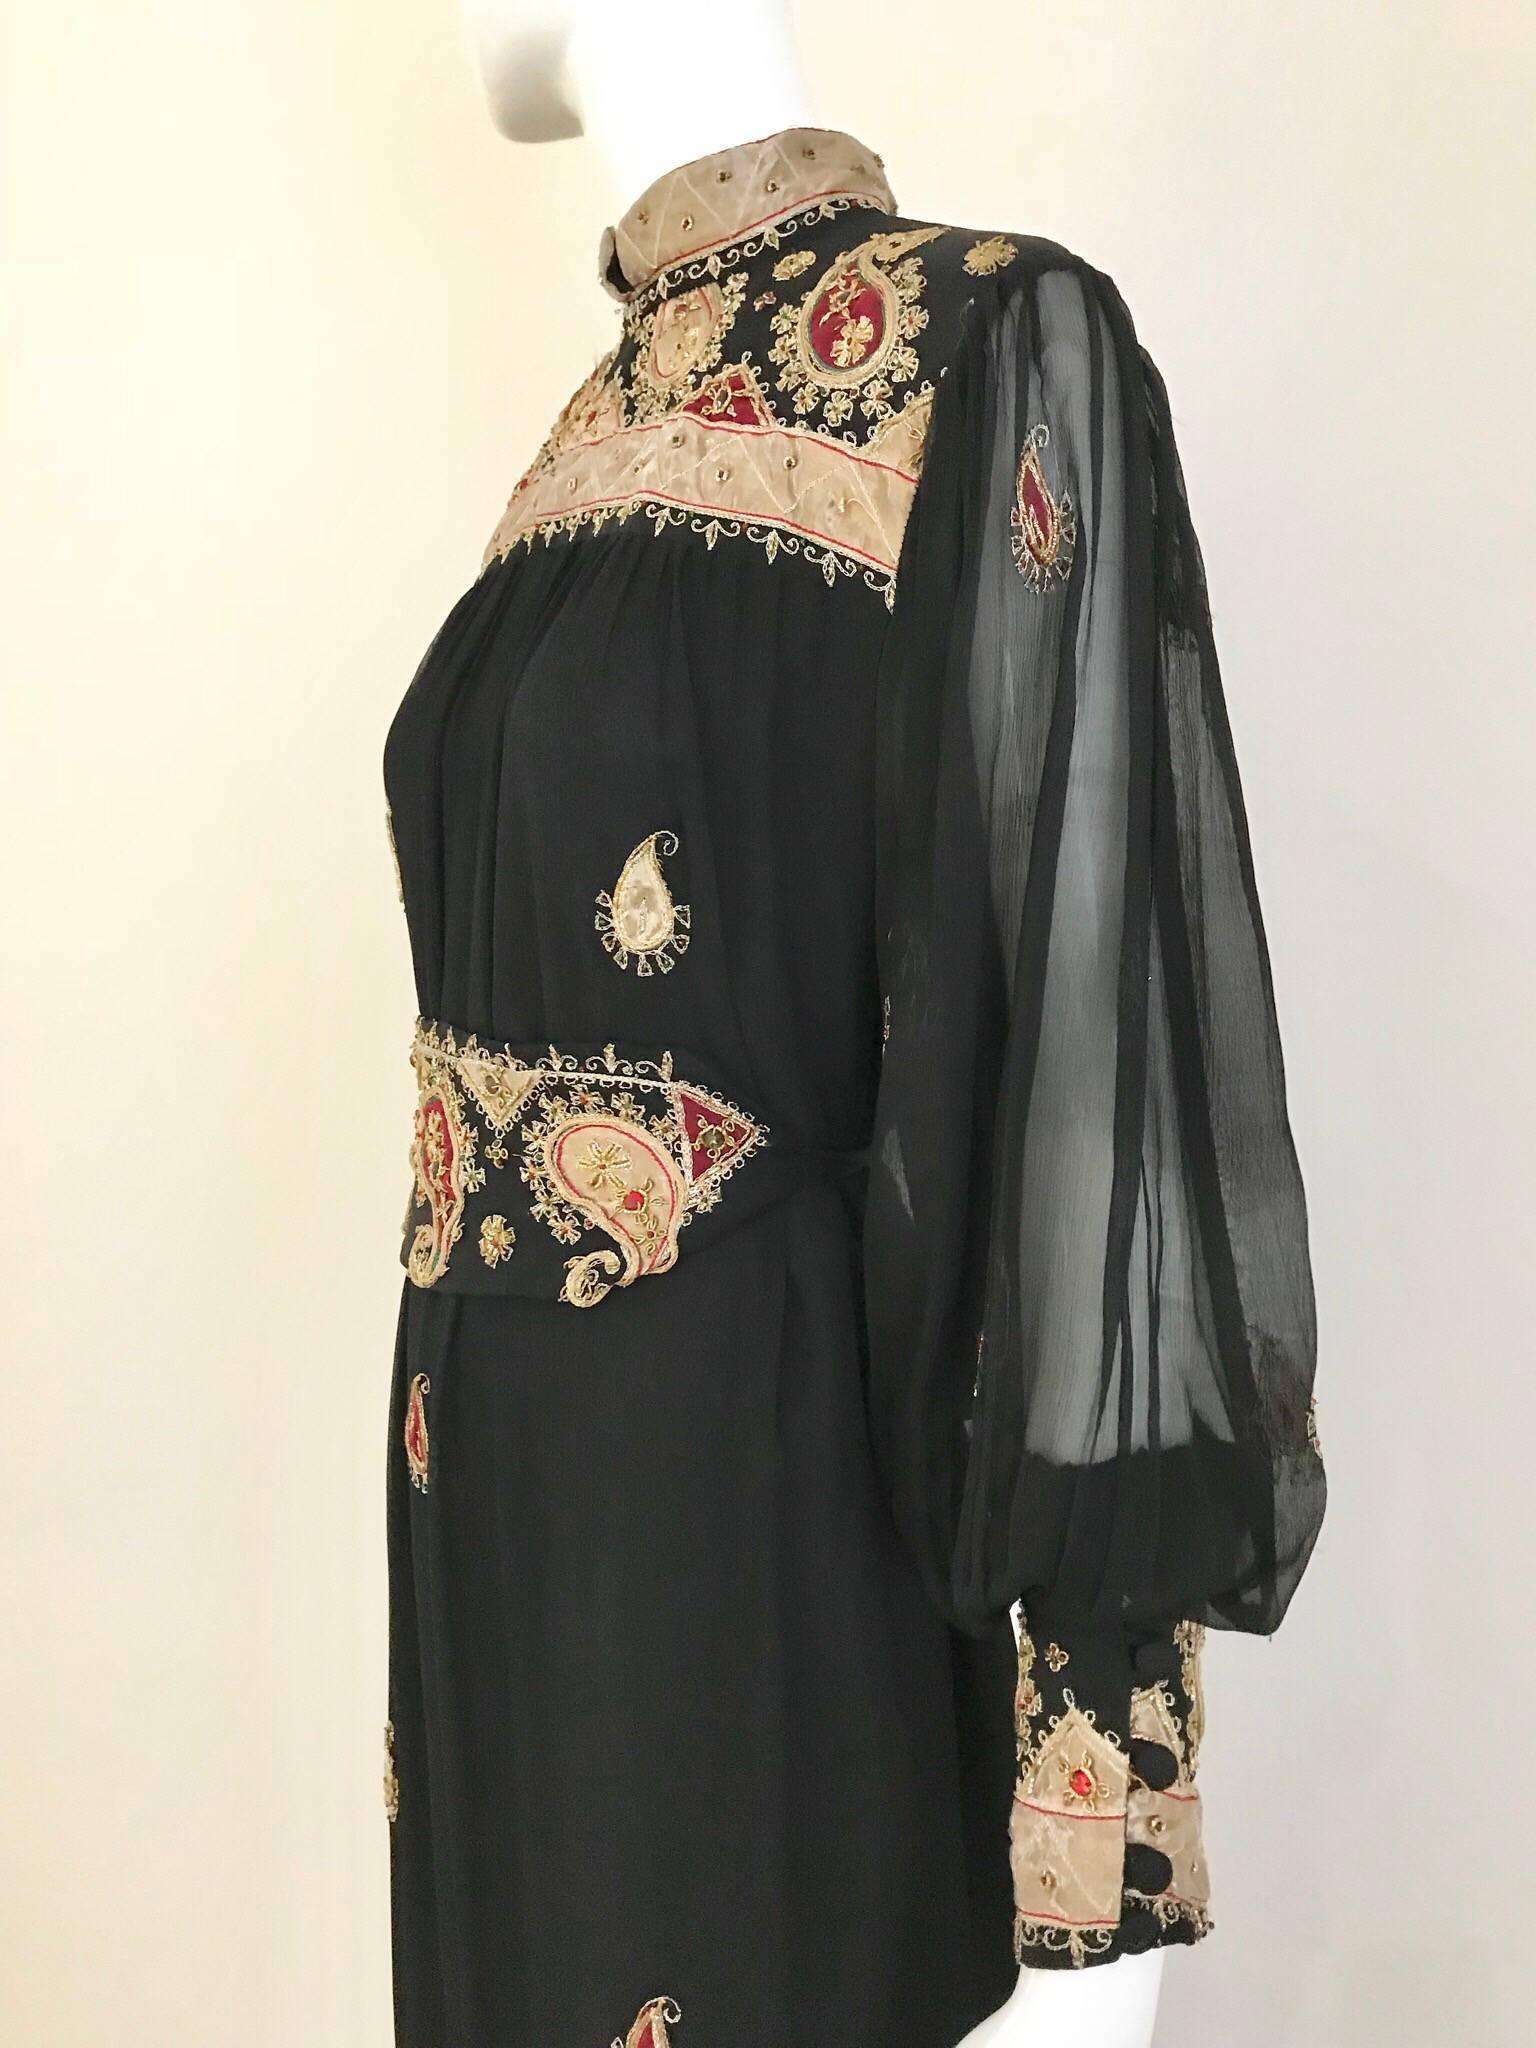 Vintage Black and Gold Paisley Embroidered Silk Caftan Maxi Dress with Belt 1